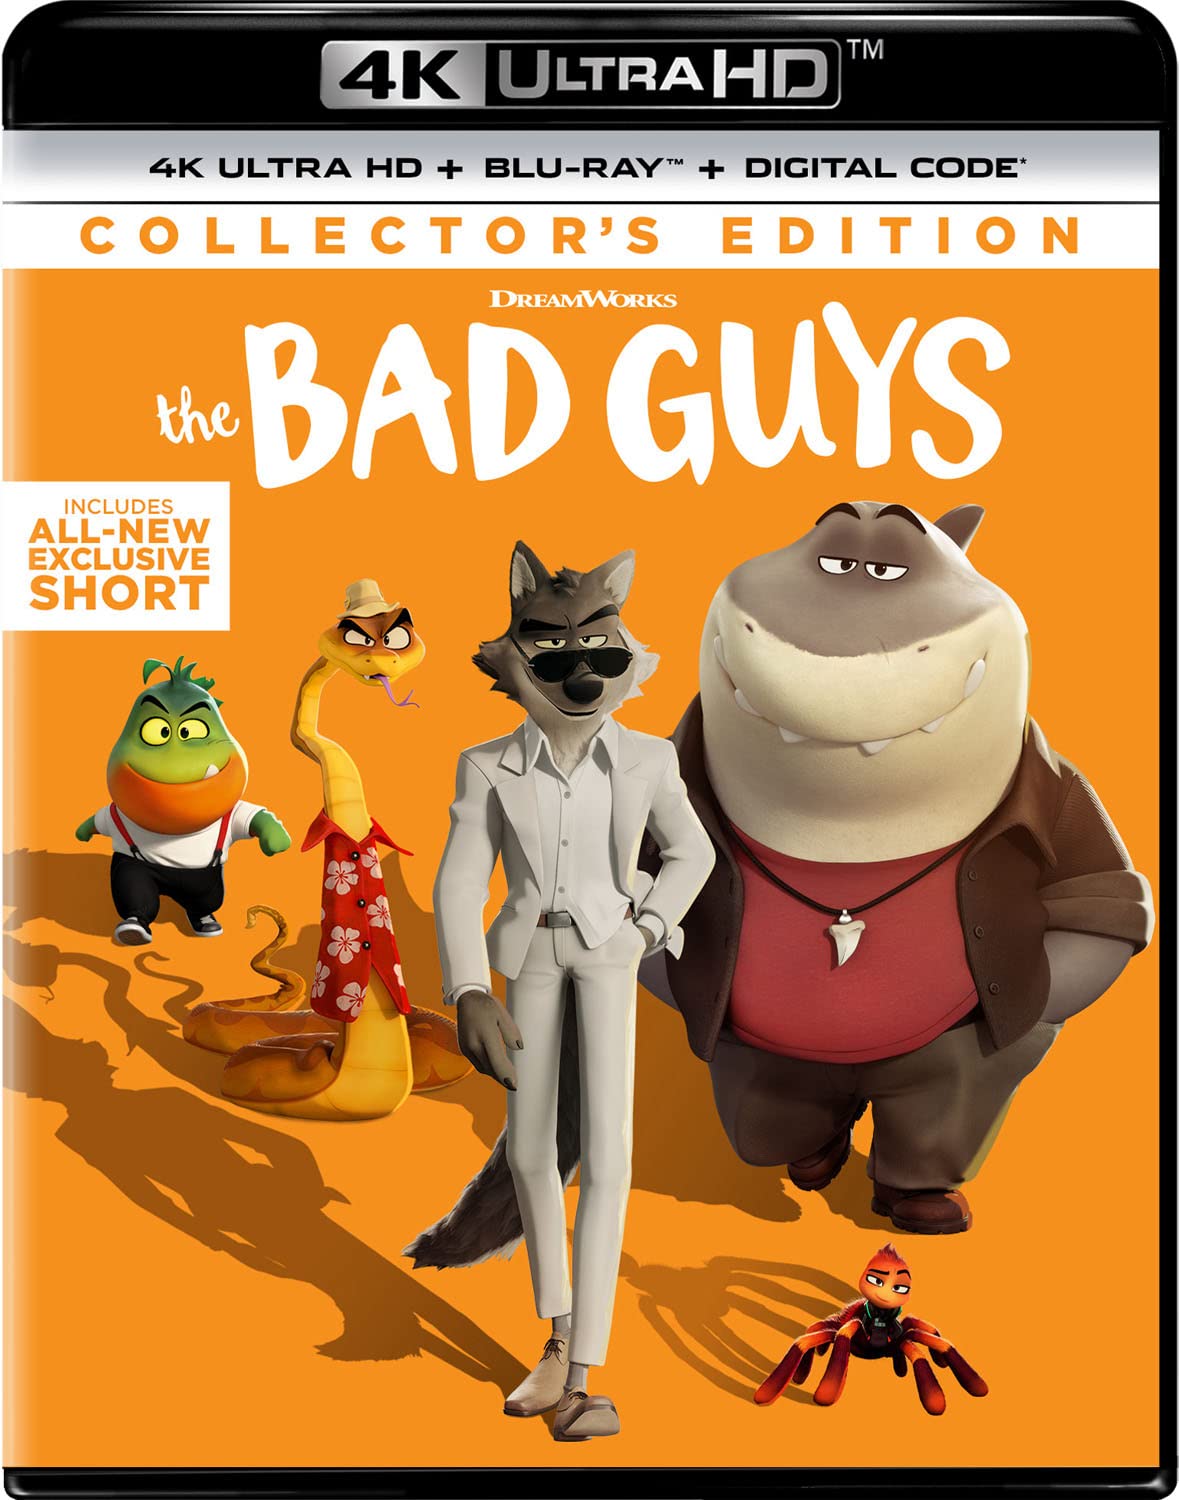 The Bad Guys - Collectors Edition 4k Blu-ray